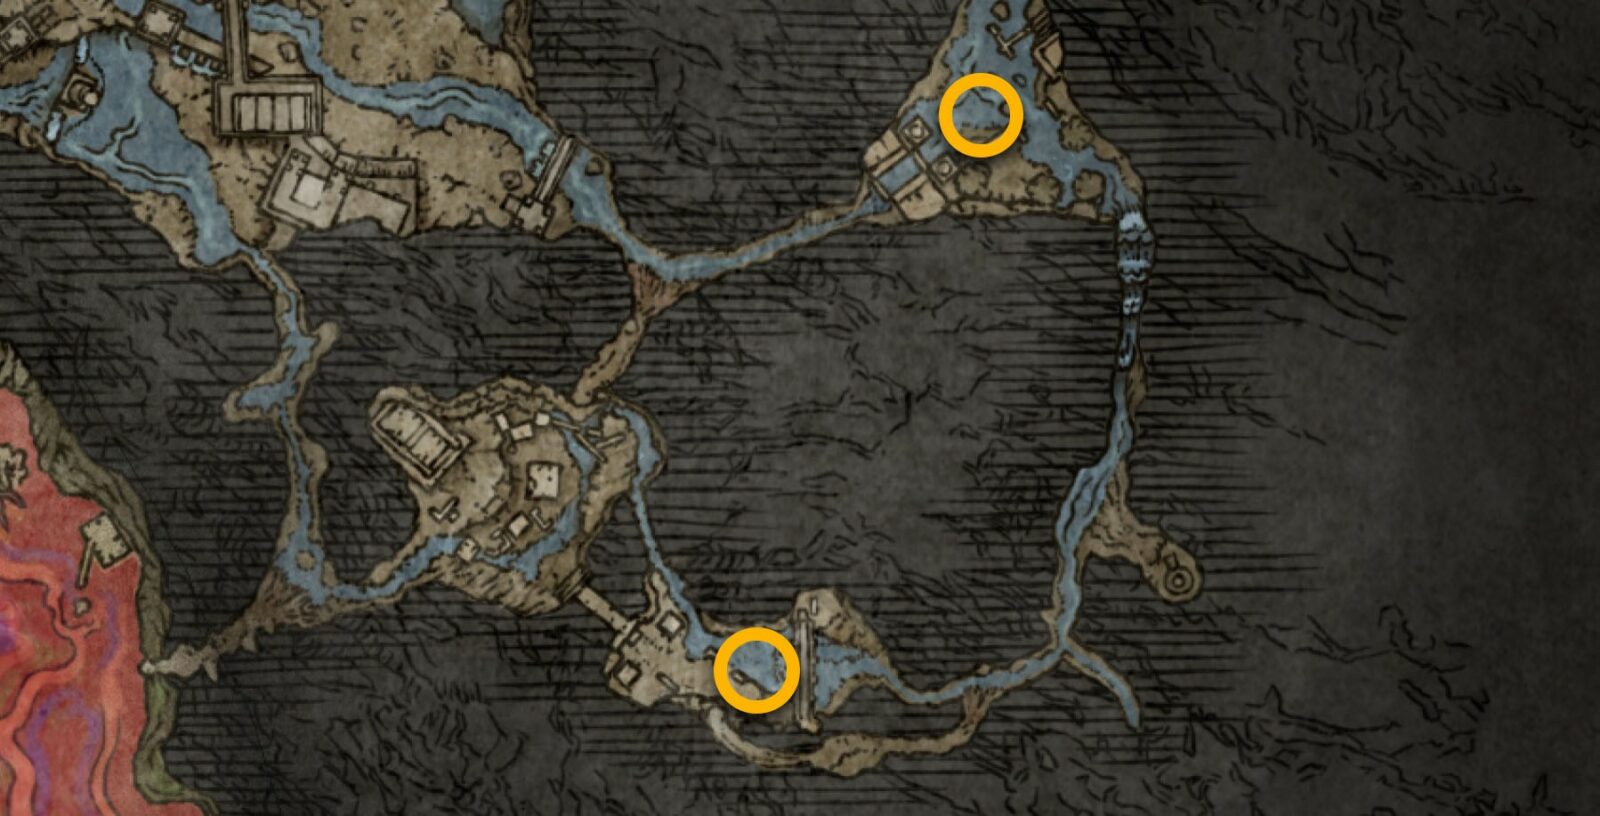 Uhl Palace Ruins entrance locations in Elden Ring